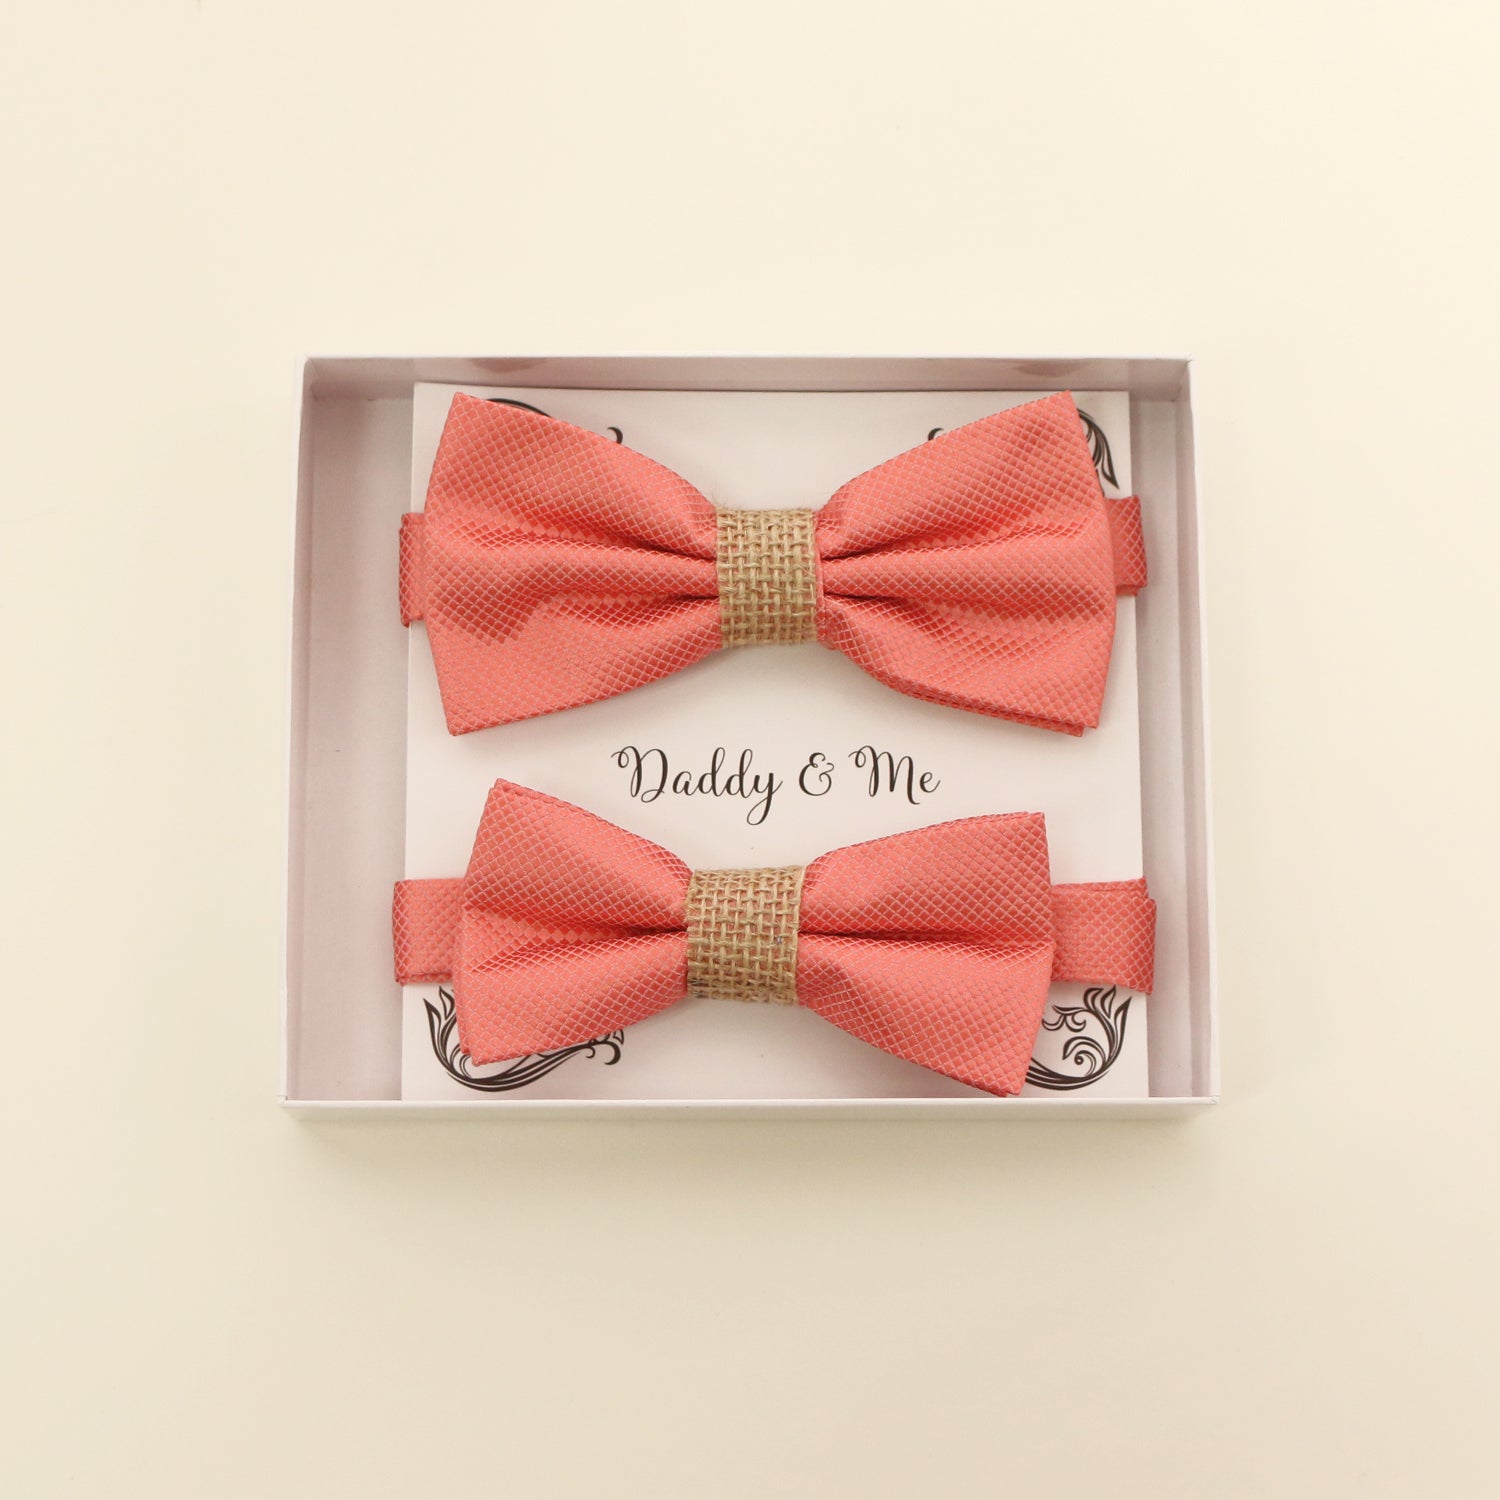 Coral burlap Bow tie set for daddy and son, Daddy me gift set, Grandpa and me, Father son match, Coral bow tie for kids bow tie, handmade